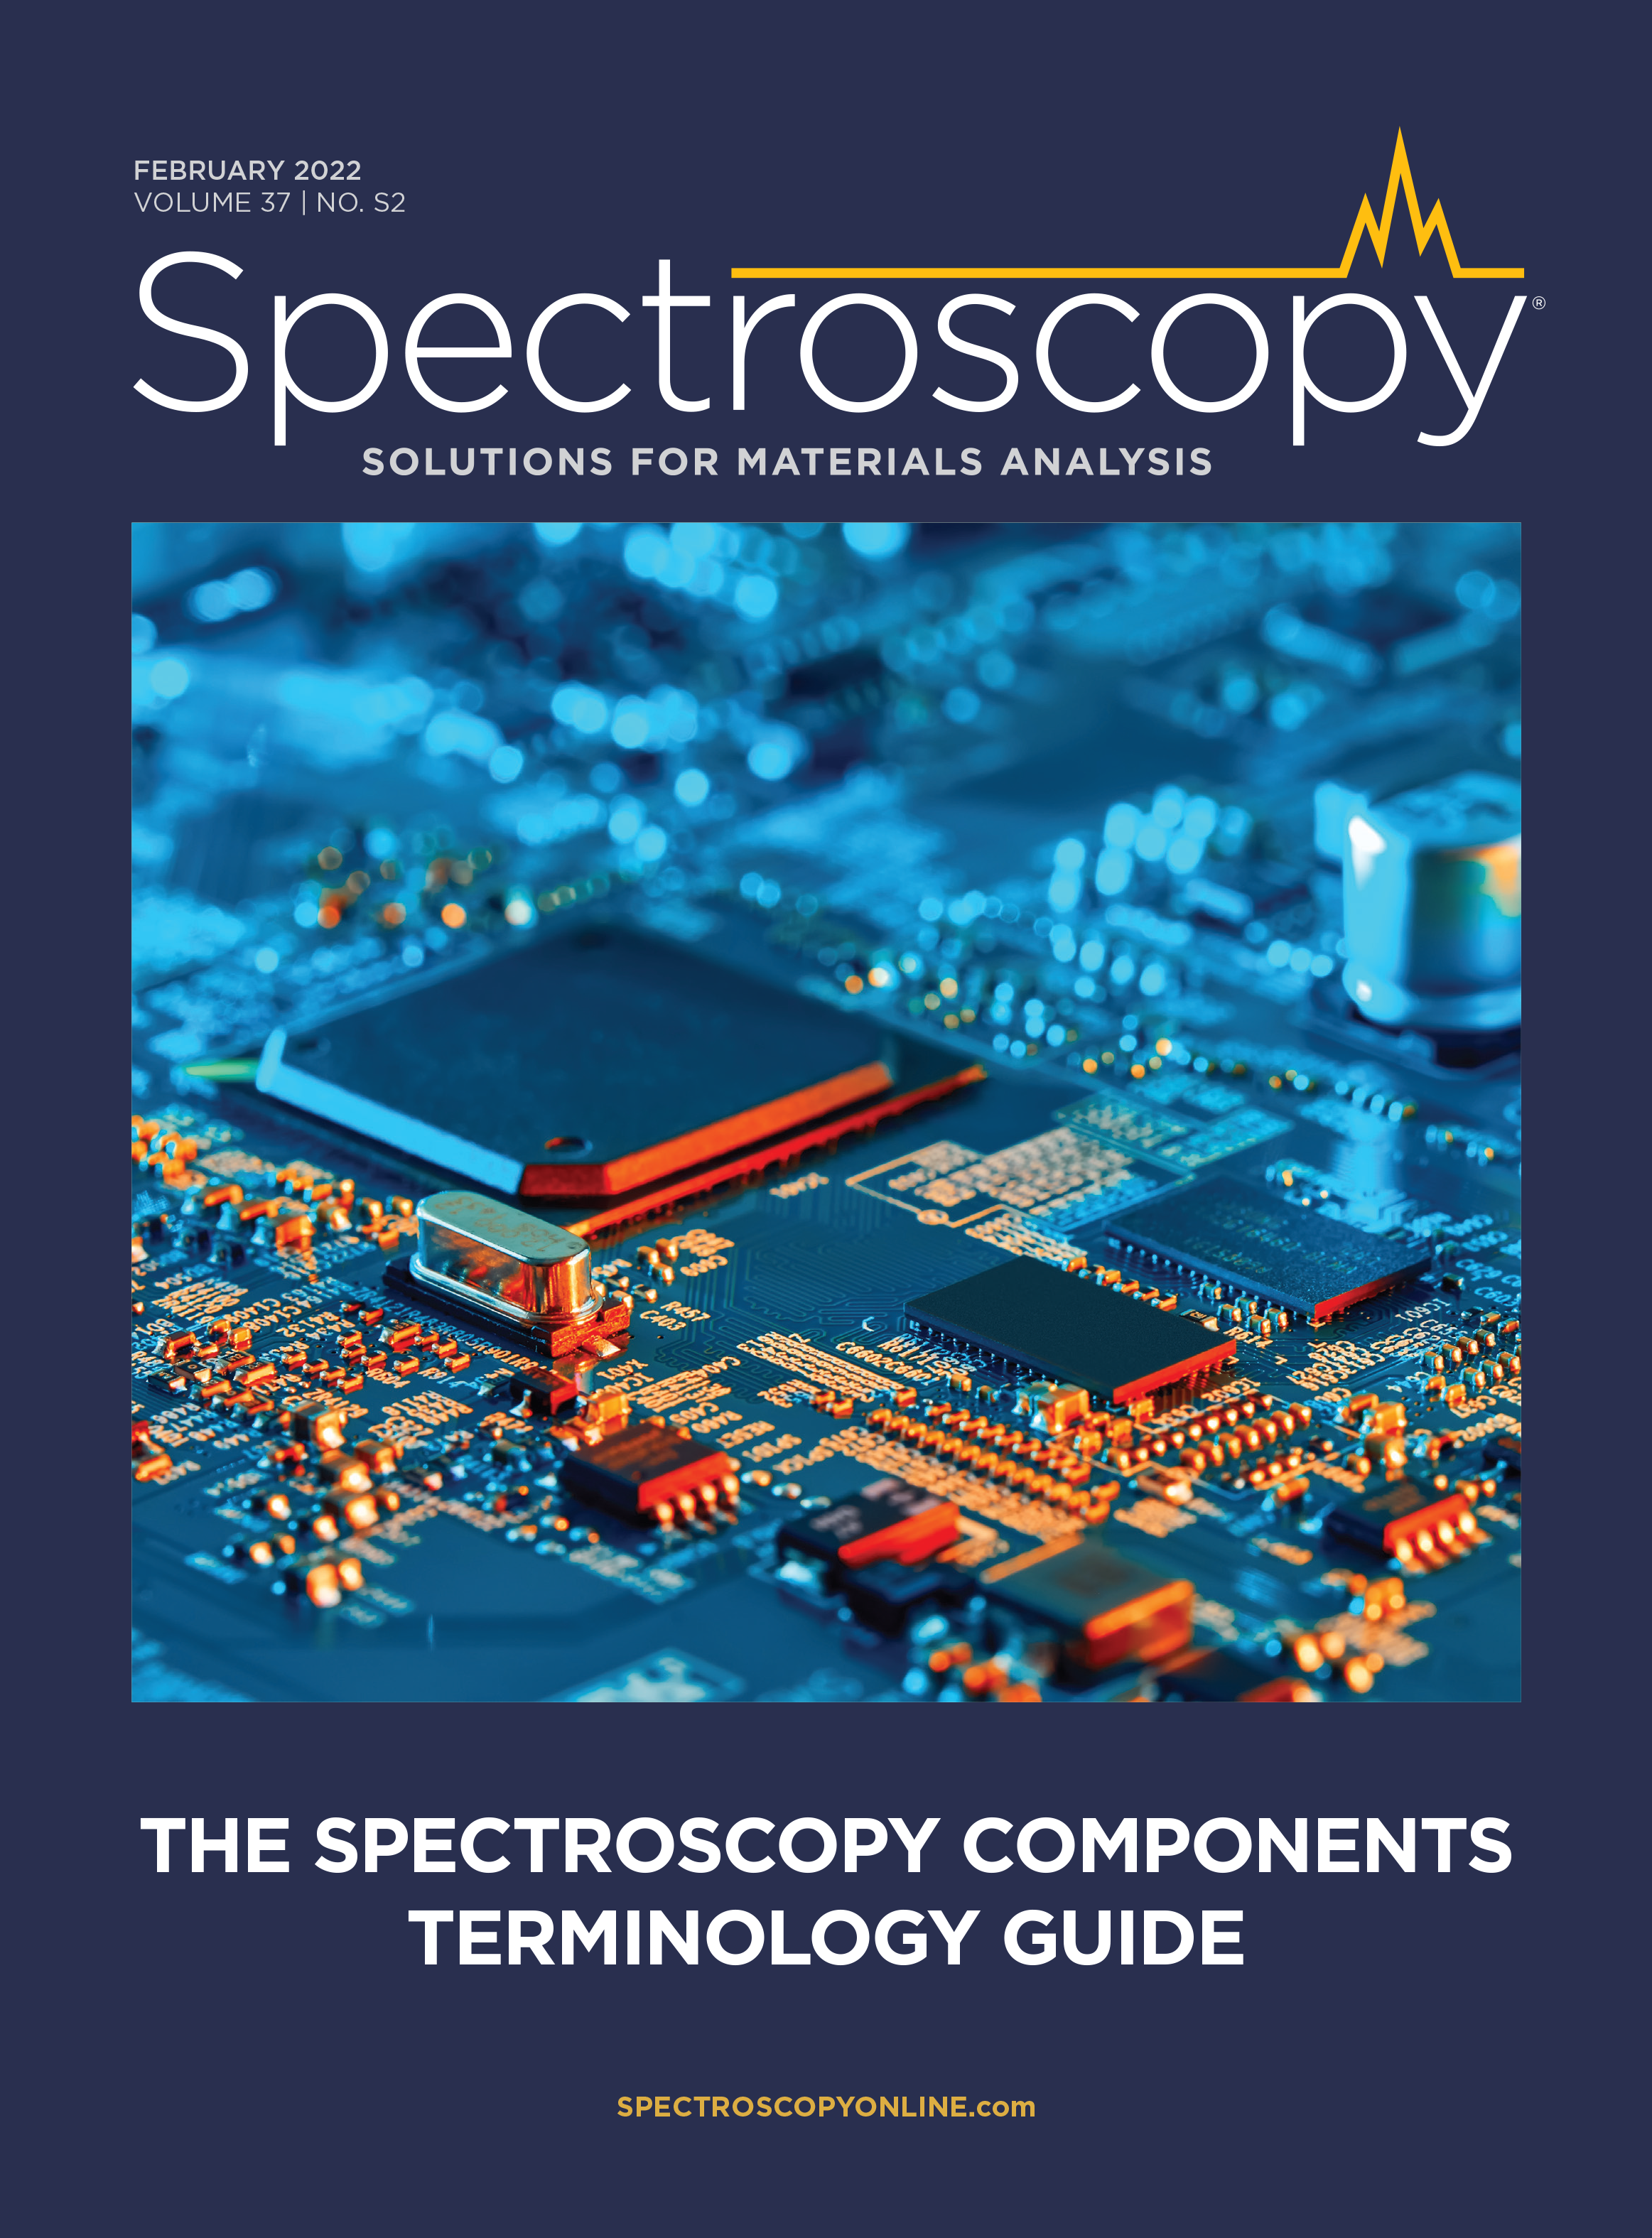 The Spectroscopy Components Terminology Guide